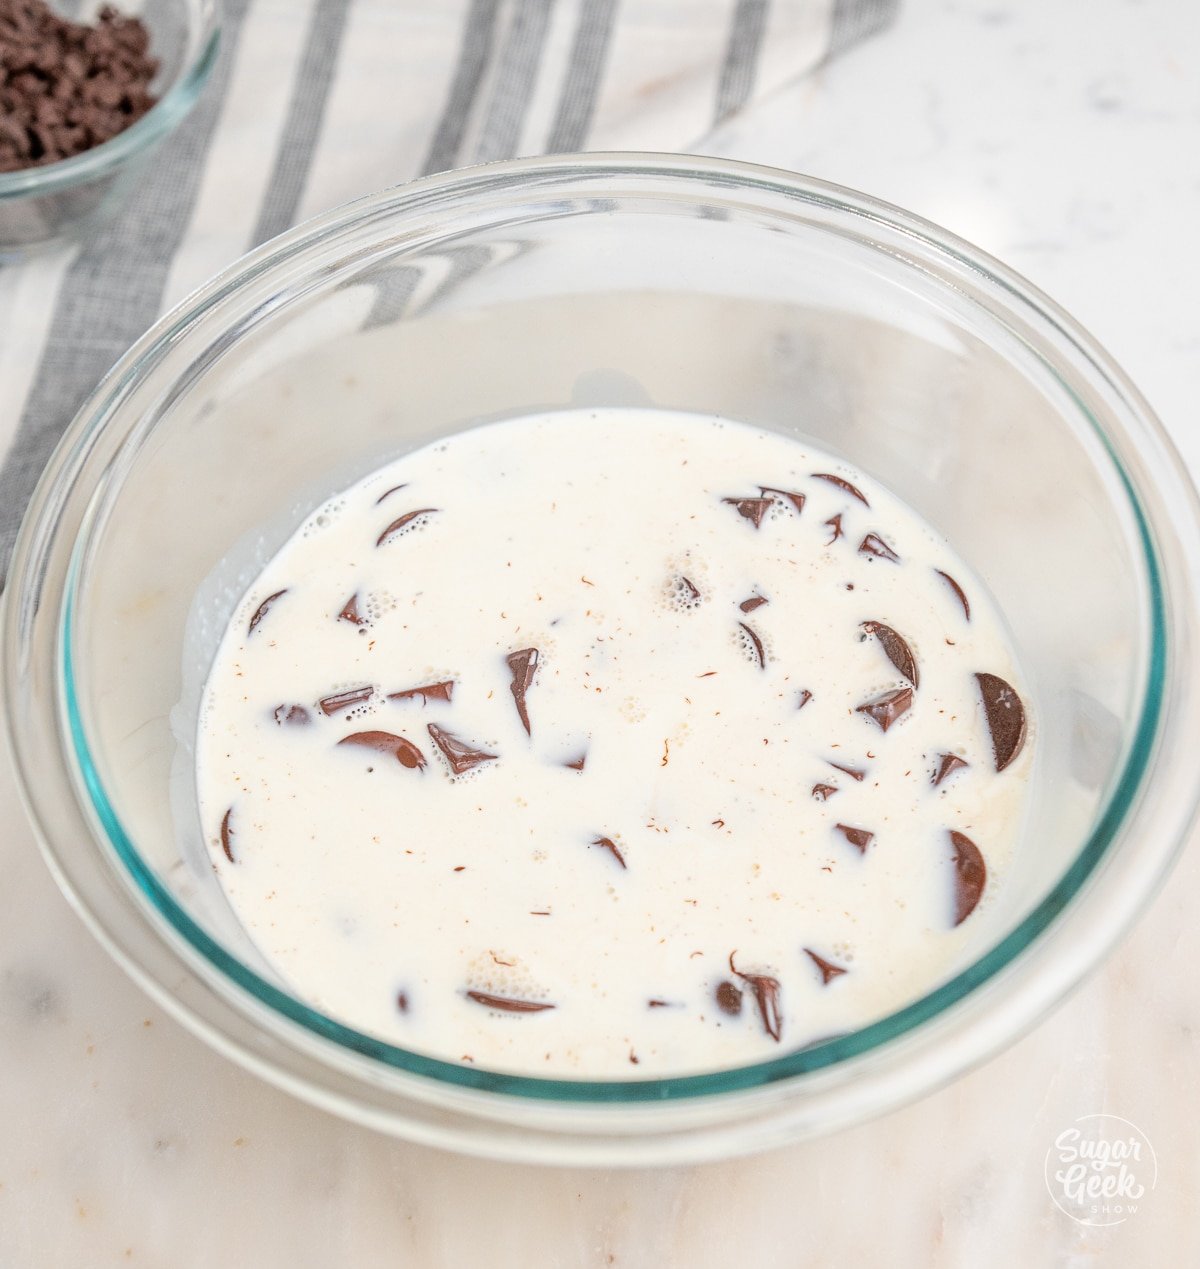 cream and chocolate in a glass bowl